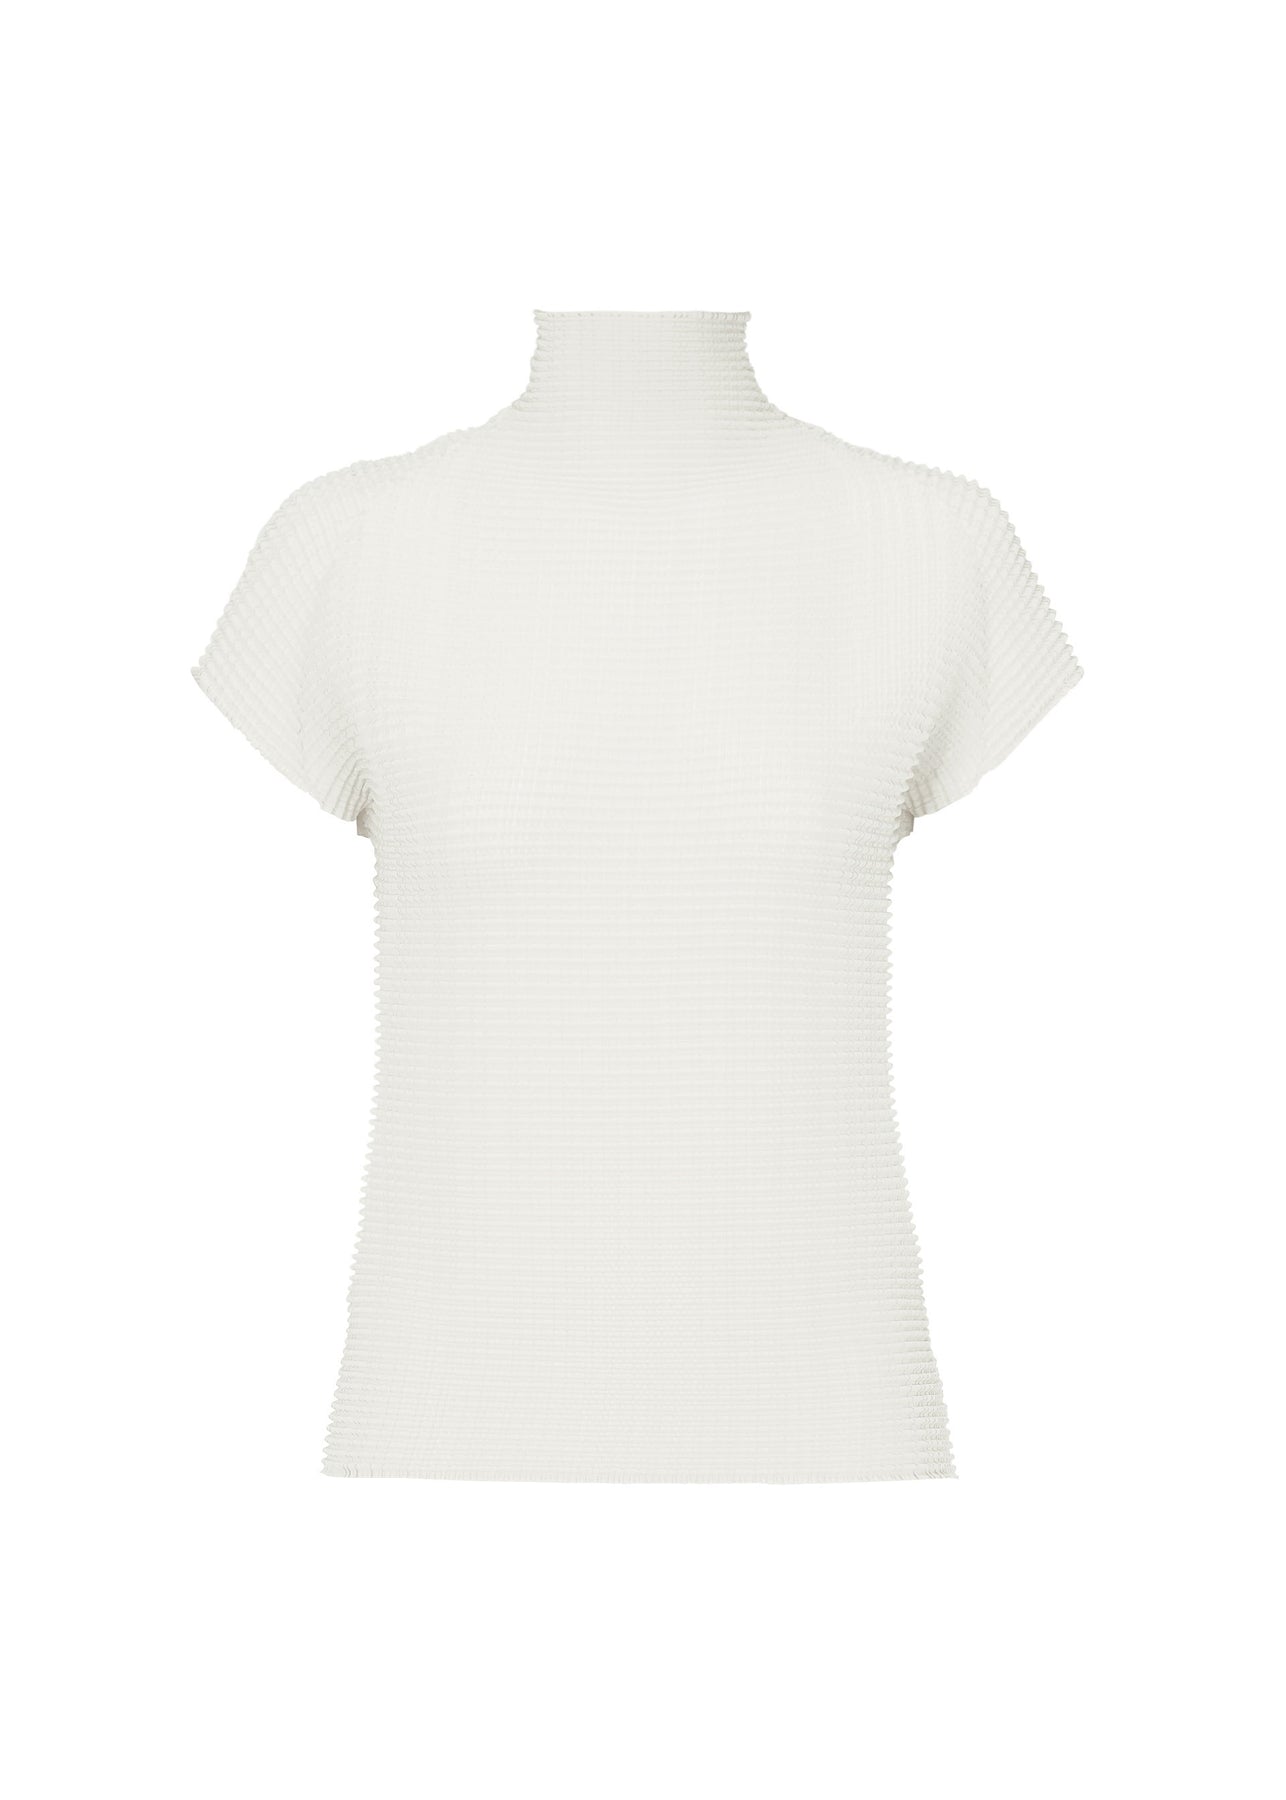 WOOLY PLEATS BK/WT-38 TOP | The official ISSEY MIYAKE ONLINE STORE 